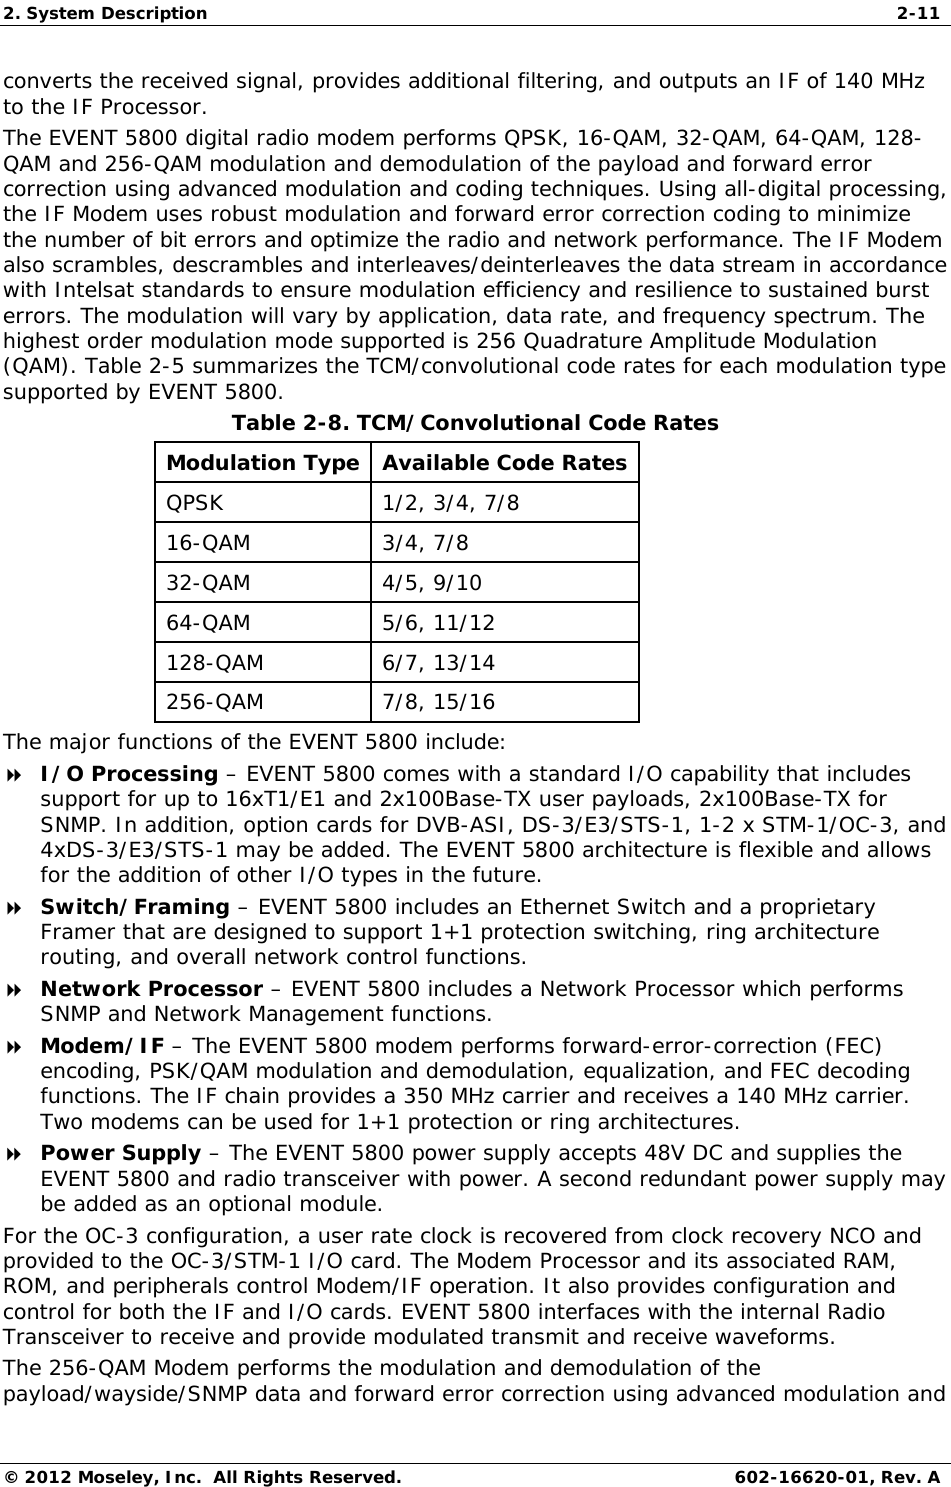 2. System Description  2-11 © 2012 Moseley, Inc.  All Rights Reserved.  602-16620-01, Rev. A converts the received signal, provides additional filtering, and outputs an IF of 140 MHz to the IF Processor.  The EVENT 5800 digital radio modem performs QPSK, 16-QAM, 32-QAM, 64-QAM, 128-QAM and 256-QAM modulation and demodulation of the payload and forward error correction using advanced modulation and coding techniques. Using all-digital processing, the IF Modem uses robust modulation and forward error correction coding to minimize the number of bit errors and optimize the radio and network performance. The IF Modem also scrambles, descrambles and interleaves/deinterleaves the data stream in accordance with Intelsat standards to ensure modulation efficiency and resilience to sustained burst errors. The modulation will vary by application, data rate, and frequency spectrum. The highest order modulation mode supported is 256 Quadrature Amplitude Modulation (QAM). Table 2-5 summarizes the TCM/convolutional code rates for each modulation type supported by EVENT 5800. Table 2-8. TCM/Convolutional Code Rates  Modulation Type  Available Code Rates  QPSK   1/2, 3/4, 7/8 16-QAM   3/4, 7/8 32-QAM   4/5, 9/10 64-QAM   5/6, 11/12 128-QAM 6/7, 13/14 256-QAM 7/8, 15/16 The major functions of the EVENT 5800 include:  I/O Processing – EVENT 5800 comes with a standard I/O capability that includes support for up to 16xT1/E1 and 2x100Base-TX user payloads, 2x100Base-TX for SNMP. In addition, option cards for DVB-ASI, DS-3/E3/STS-1, 1-2 x STM-1/OC-3, and 4xDS-3/E3/STS-1 may be added. The EVENT 5800 architecture is flexible and allows for the addition of other I/O types in the future.  Switch/Framing – EVENT 5800 includes an Ethernet Switch and a proprietary Framer that are designed to support 1+1 protection switching, ring architecture routing, and overall network control functions.  Network Processor – EVENT 5800 includes a Network Processor which performs SNMP and Network Management functions.  Modem/IF – The EVENT 5800 modem performs forward-error-correction (FEC) encoding, PSK/QAM modulation and demodulation, equalization, and FEC decoding functions. The IF chain provides a 350 MHz carrier and receives a 140 MHz carrier. Two modems can be used for 1+1 protection or ring architectures.  Power Supply – The EVENT 5800 power supply accepts 48V DC and supplies the EVENT 5800 and radio transceiver with power. A second redundant power supply may be added as an optional module. For the OC-3 configuration, a user rate clock is recovered from clock recovery NCO and provided to the OC-3/STM-1 I/O card. The Modem Processor and its associated RAM, ROM, and peripherals control Modem/IF operation. It also provides configuration and control for both the IF and I/O cards. EVENT 5800 interfaces with the internal Radio Transceiver to receive and provide modulated transmit and receive waveforms.  The 256-QAM Modem performs the modulation and demodulation of the payload/wayside/SNMP data and forward error correction using advanced modulation and 